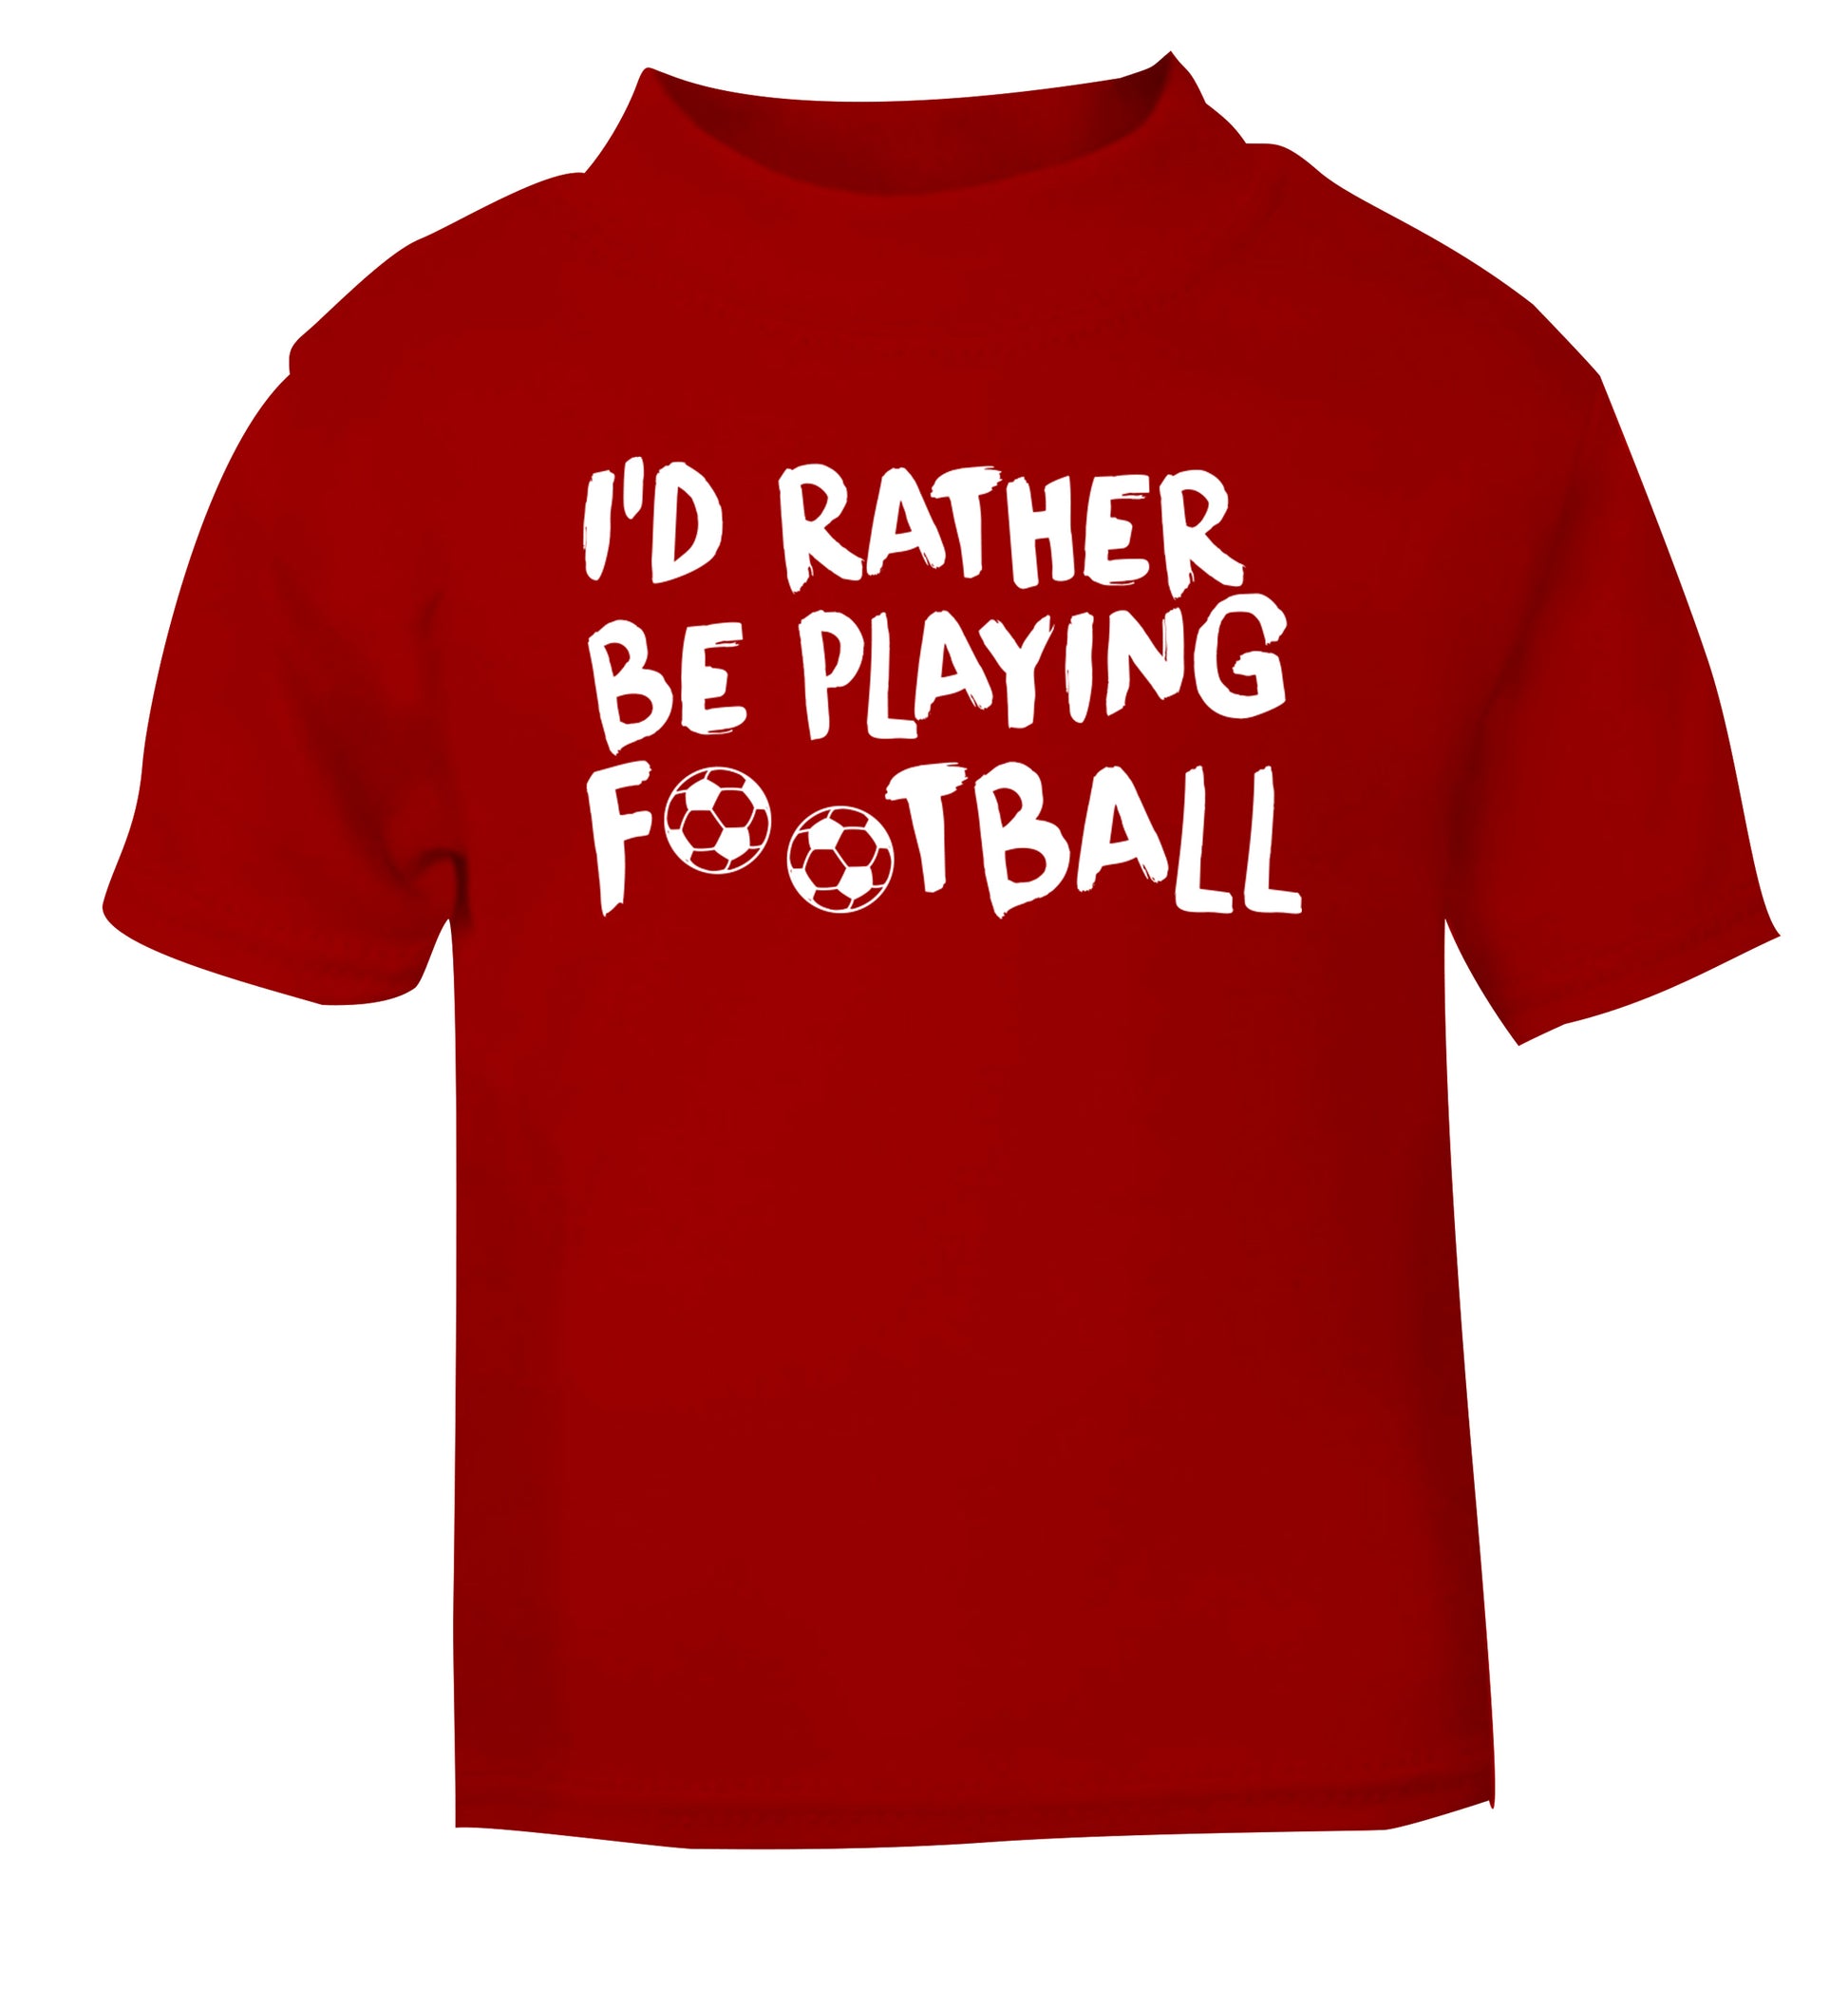 I'd rather be playing football red Baby Toddler Tshirt 2 Years